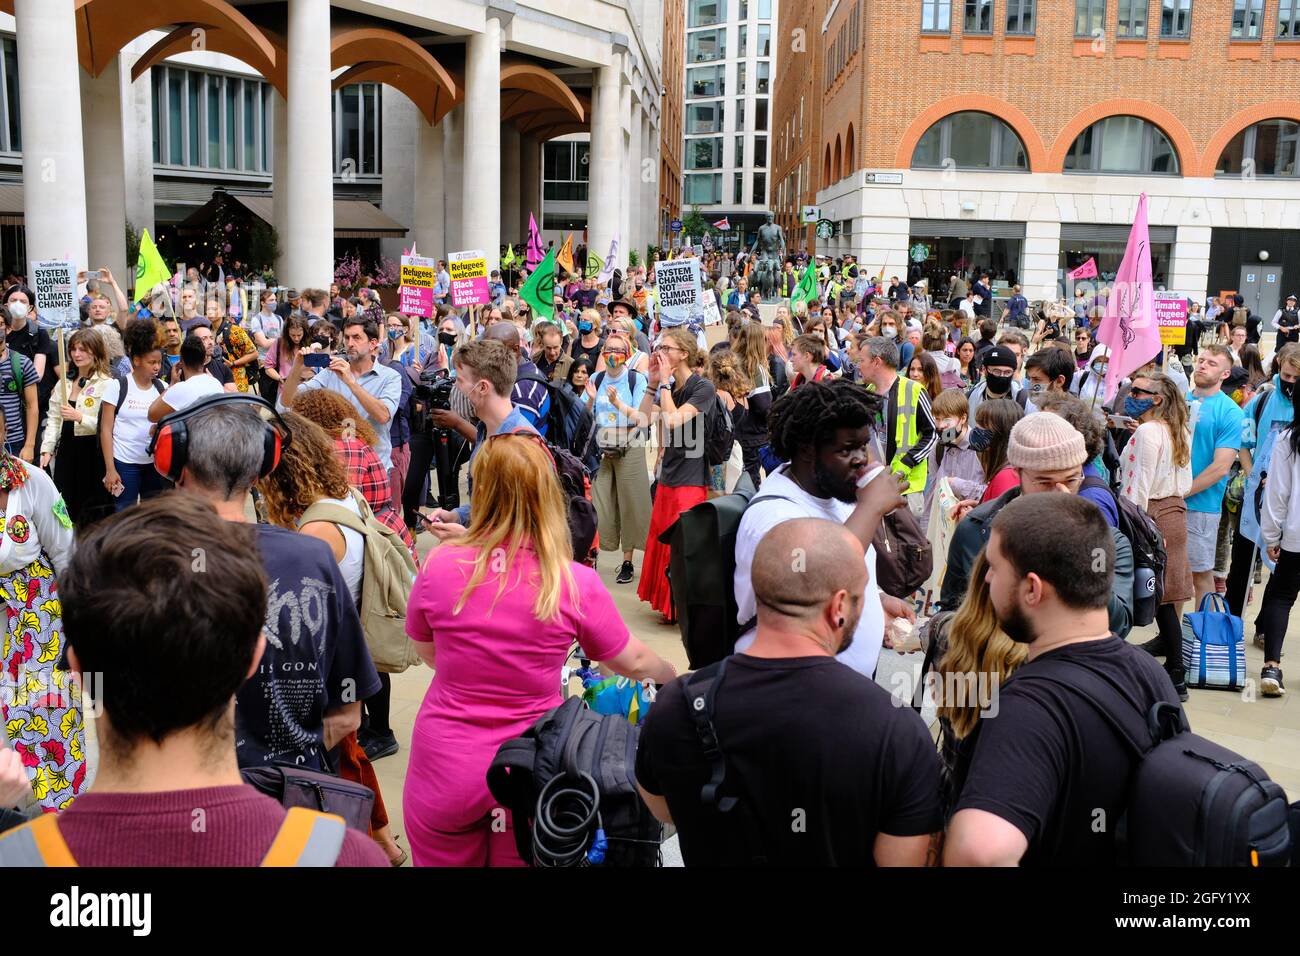 LONDON - 27TH AUGUST 2021: Extinction Rebellion 'Blood Money' climate change protest in the City of London. Protesters on Paternoster Square. Stock Photo